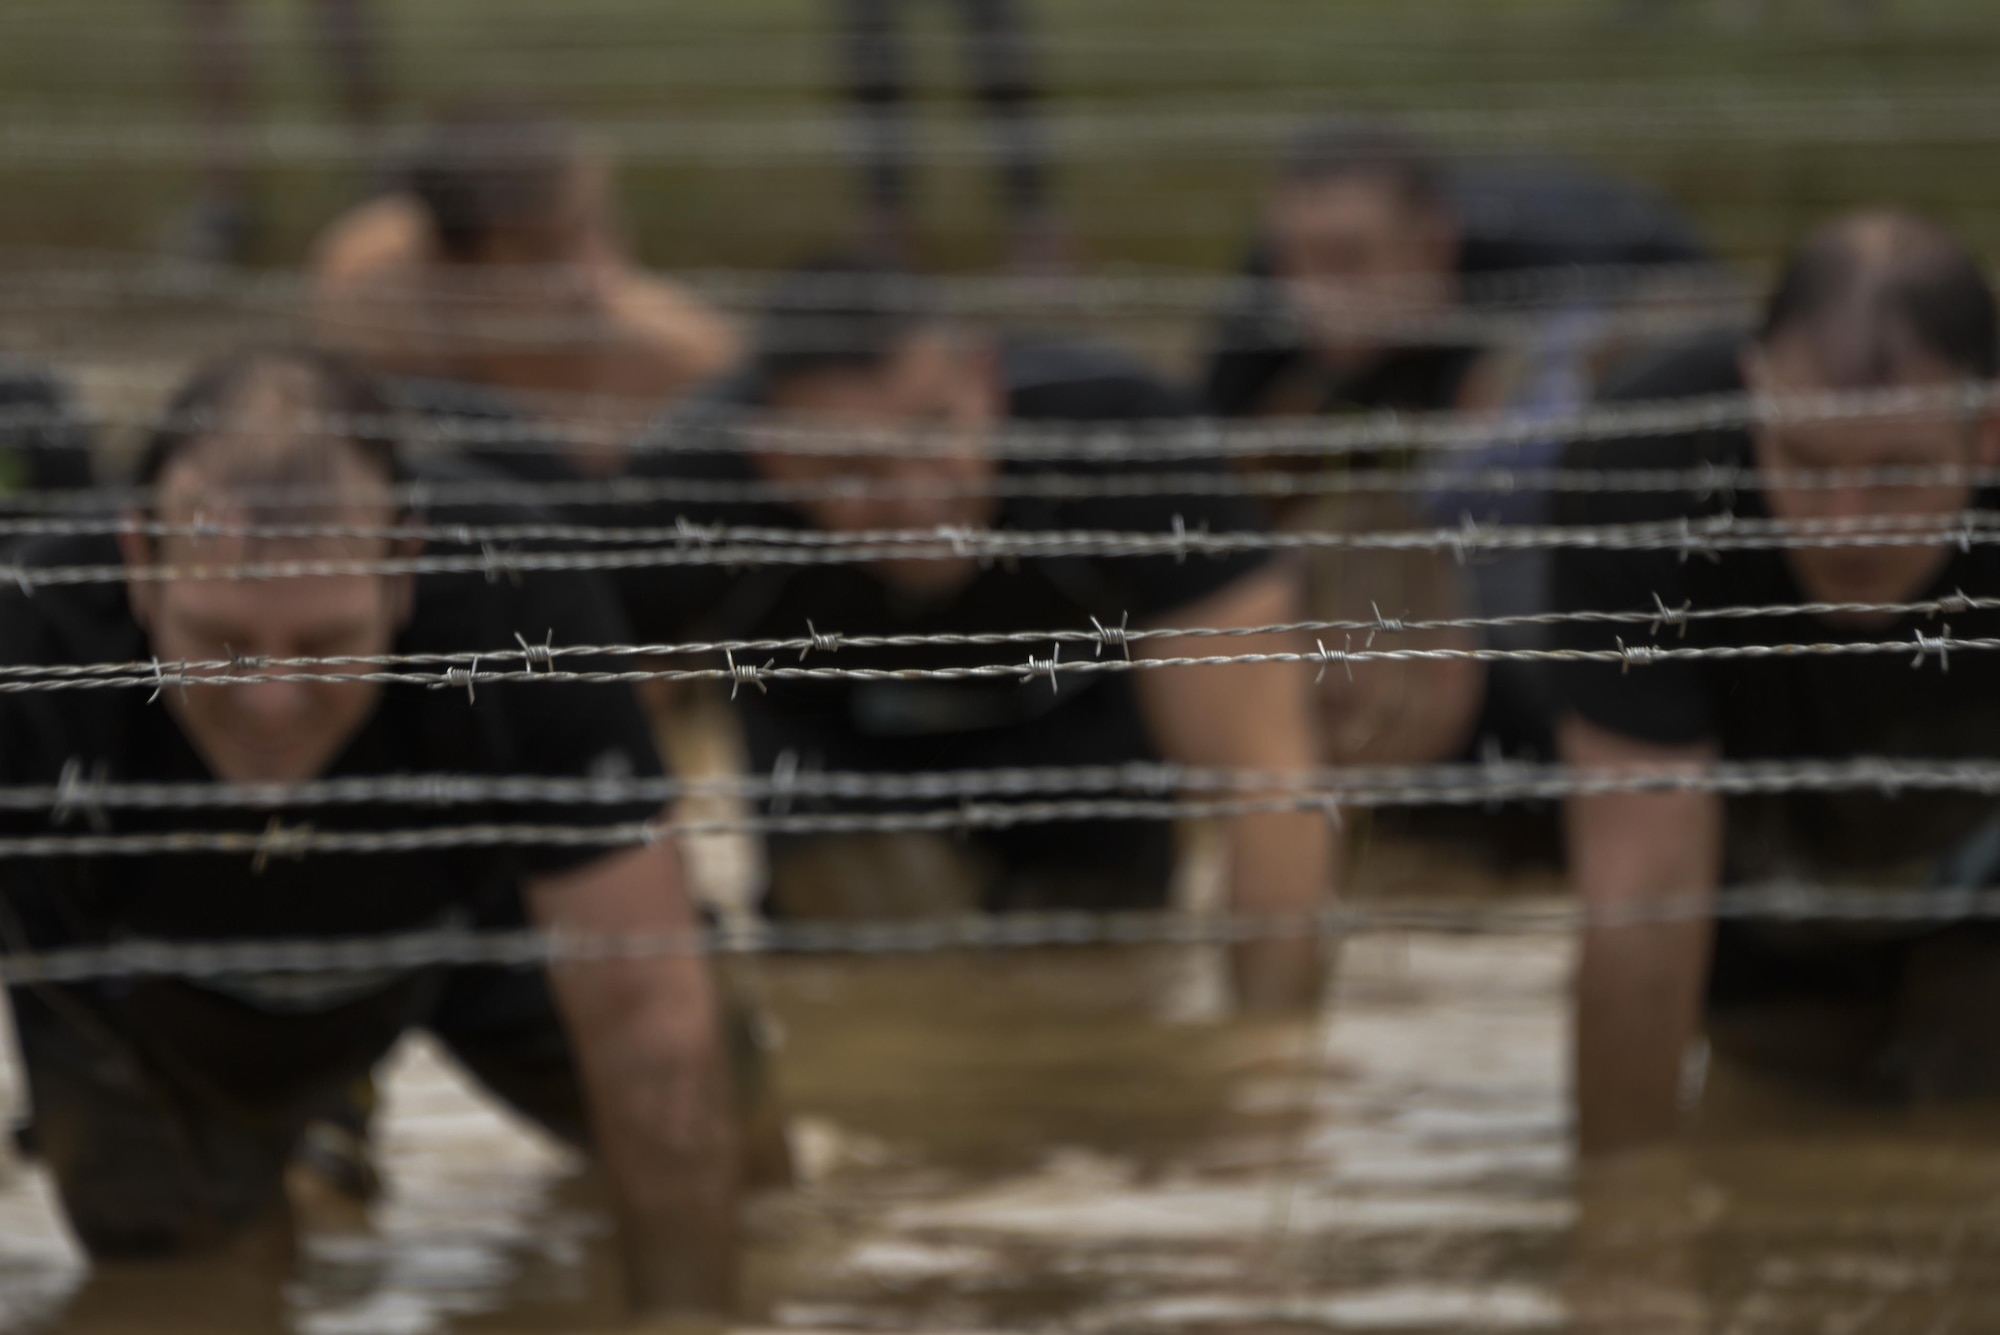 Airmen from the 70th Intelligence, Surveillance and Reconnaissance Wing crawl through mud under rows of barbed wire during the 2016 Savage Race October 8, 2016 at Kennedyville, Md. 70th ISRW participants endured a seven-mile obstacle course of cargo net walls, creeks, ice cold water and climbing to test their stamina and strength as a team. (U.S. Air Force photo/Staff Sgt. Alexandre Montes)